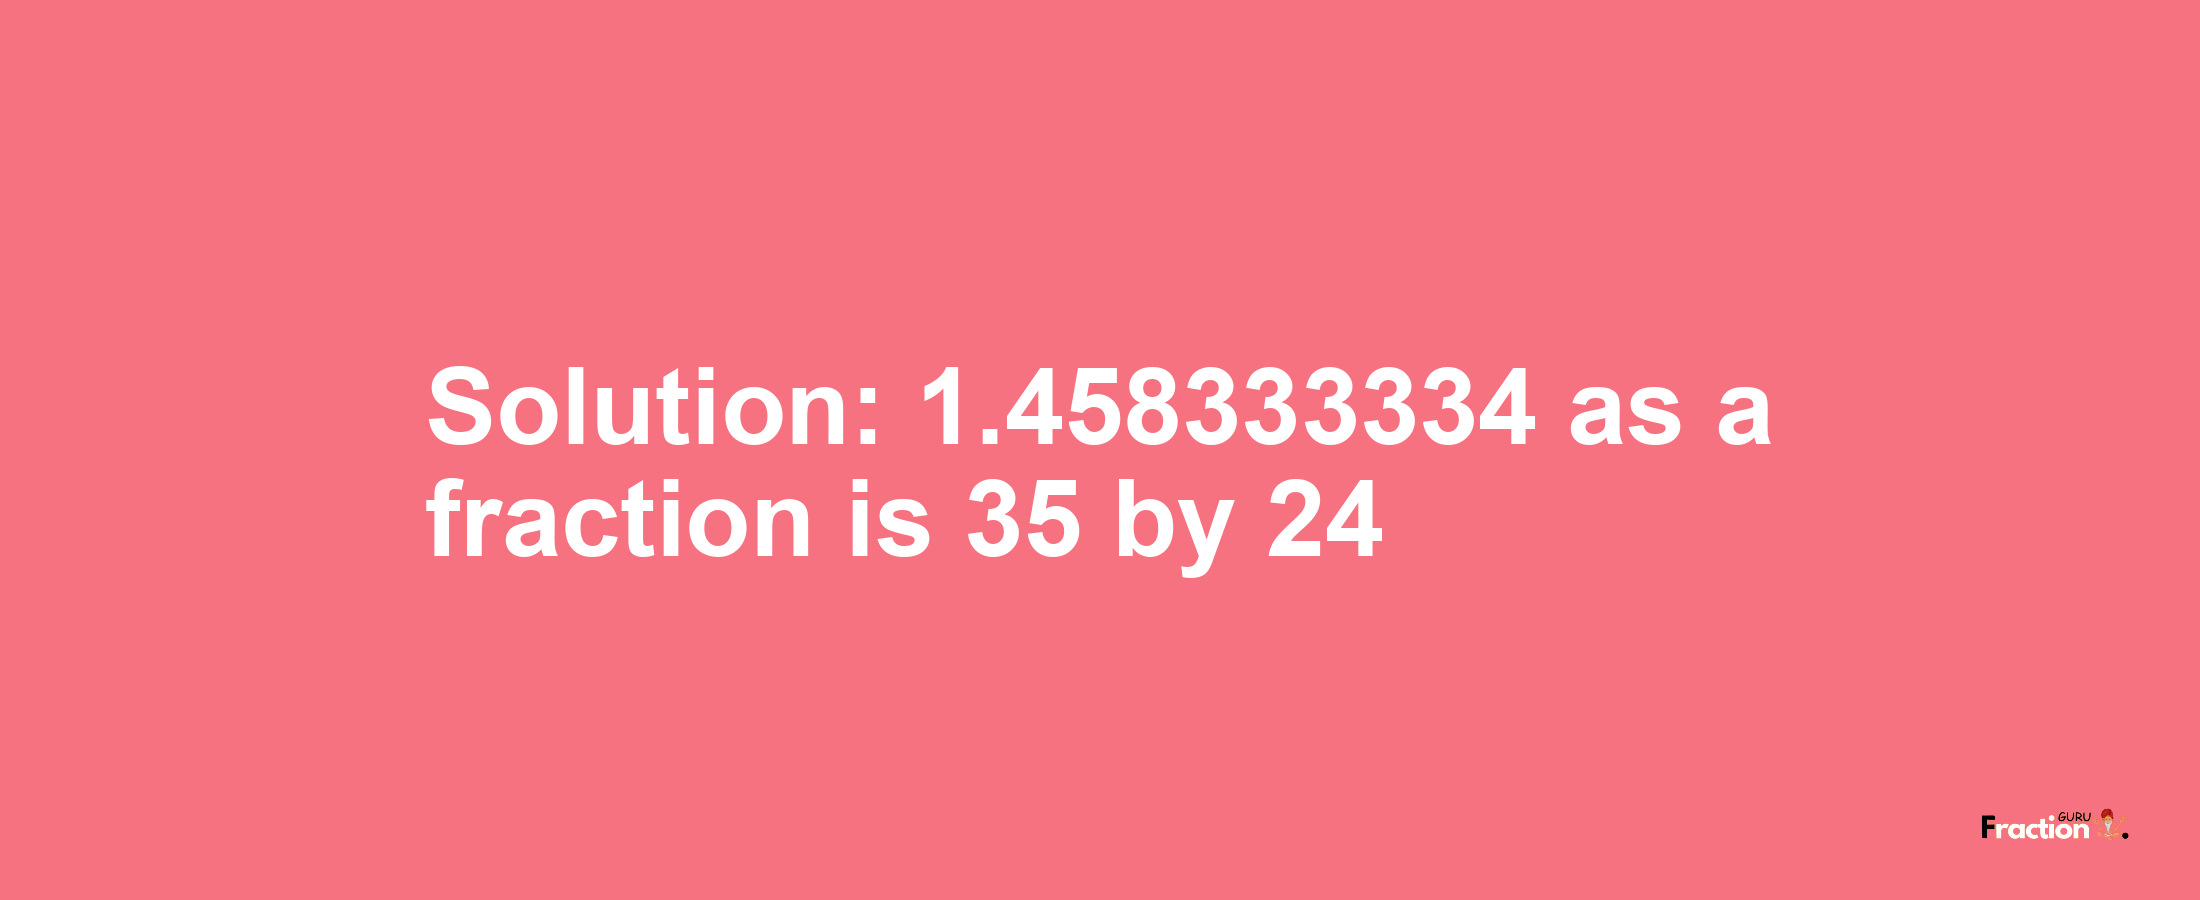 Solution:1.458333334 as a fraction is 35/24